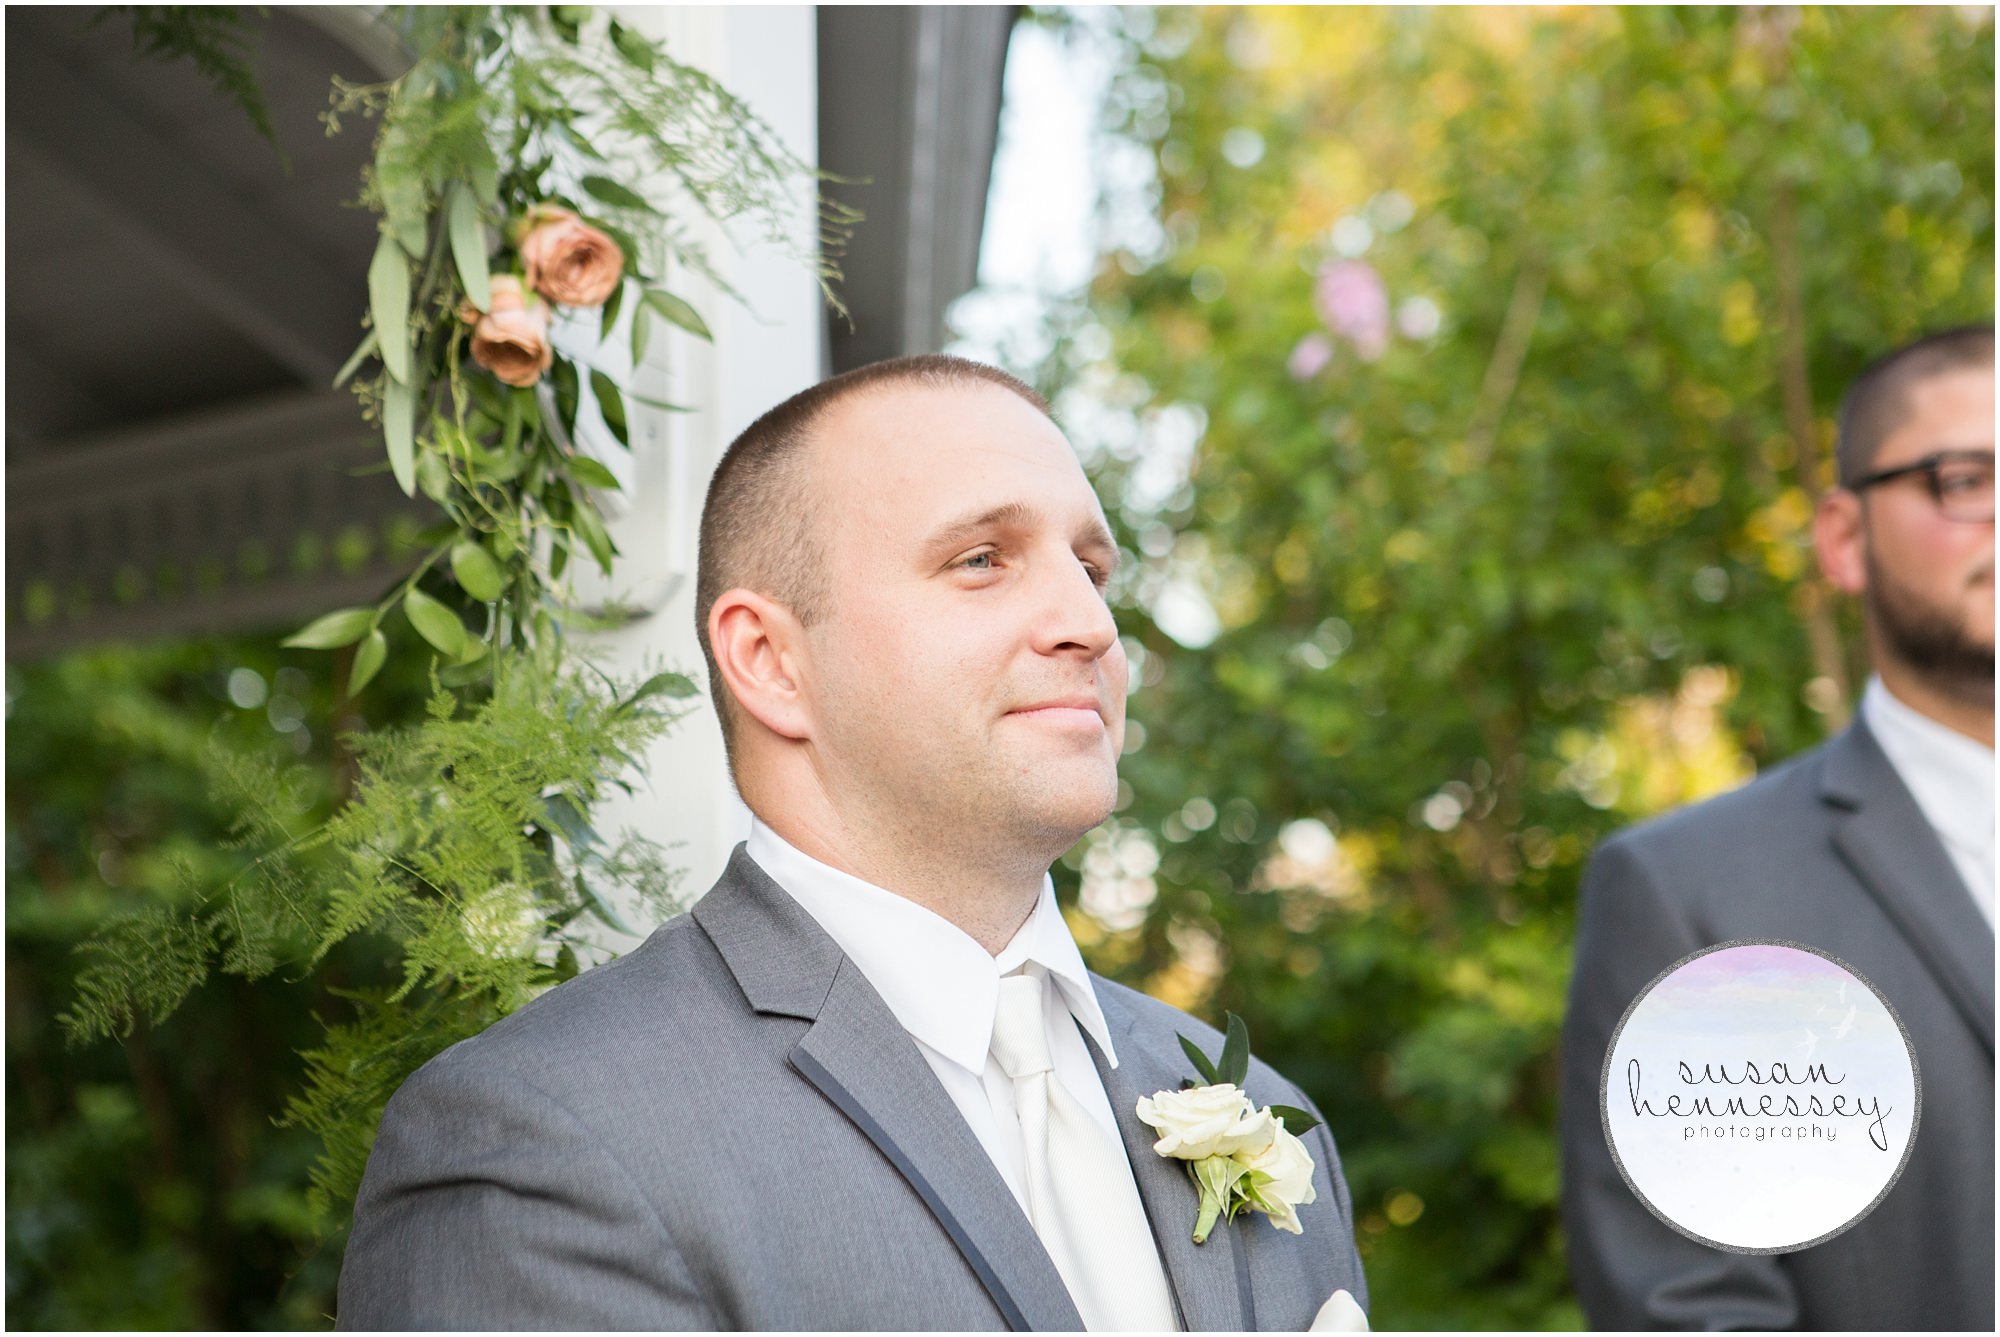 Groom waits for bride to walk down the aisle.